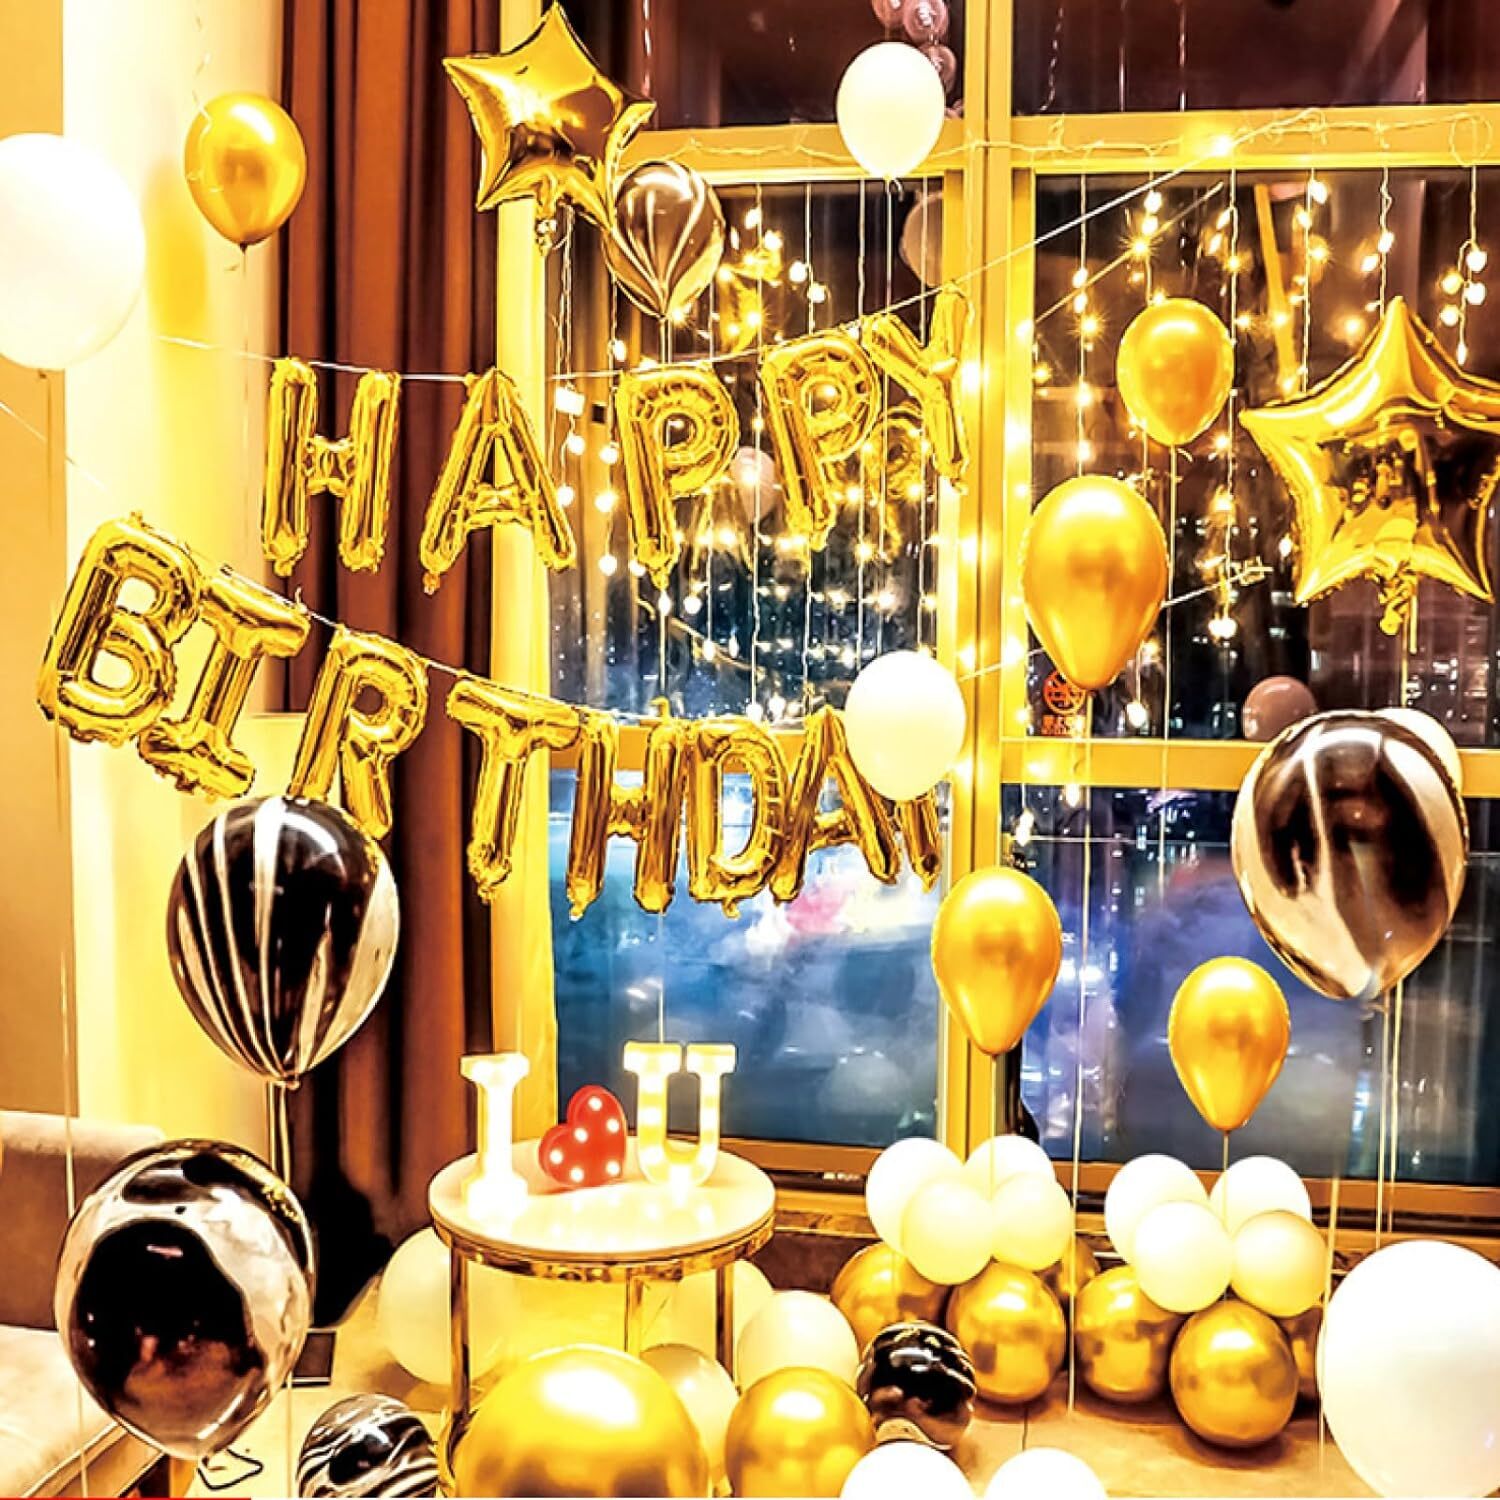 Deluxe Gold Happy Birthday Party Celebration Decorations Balloons Lights Set